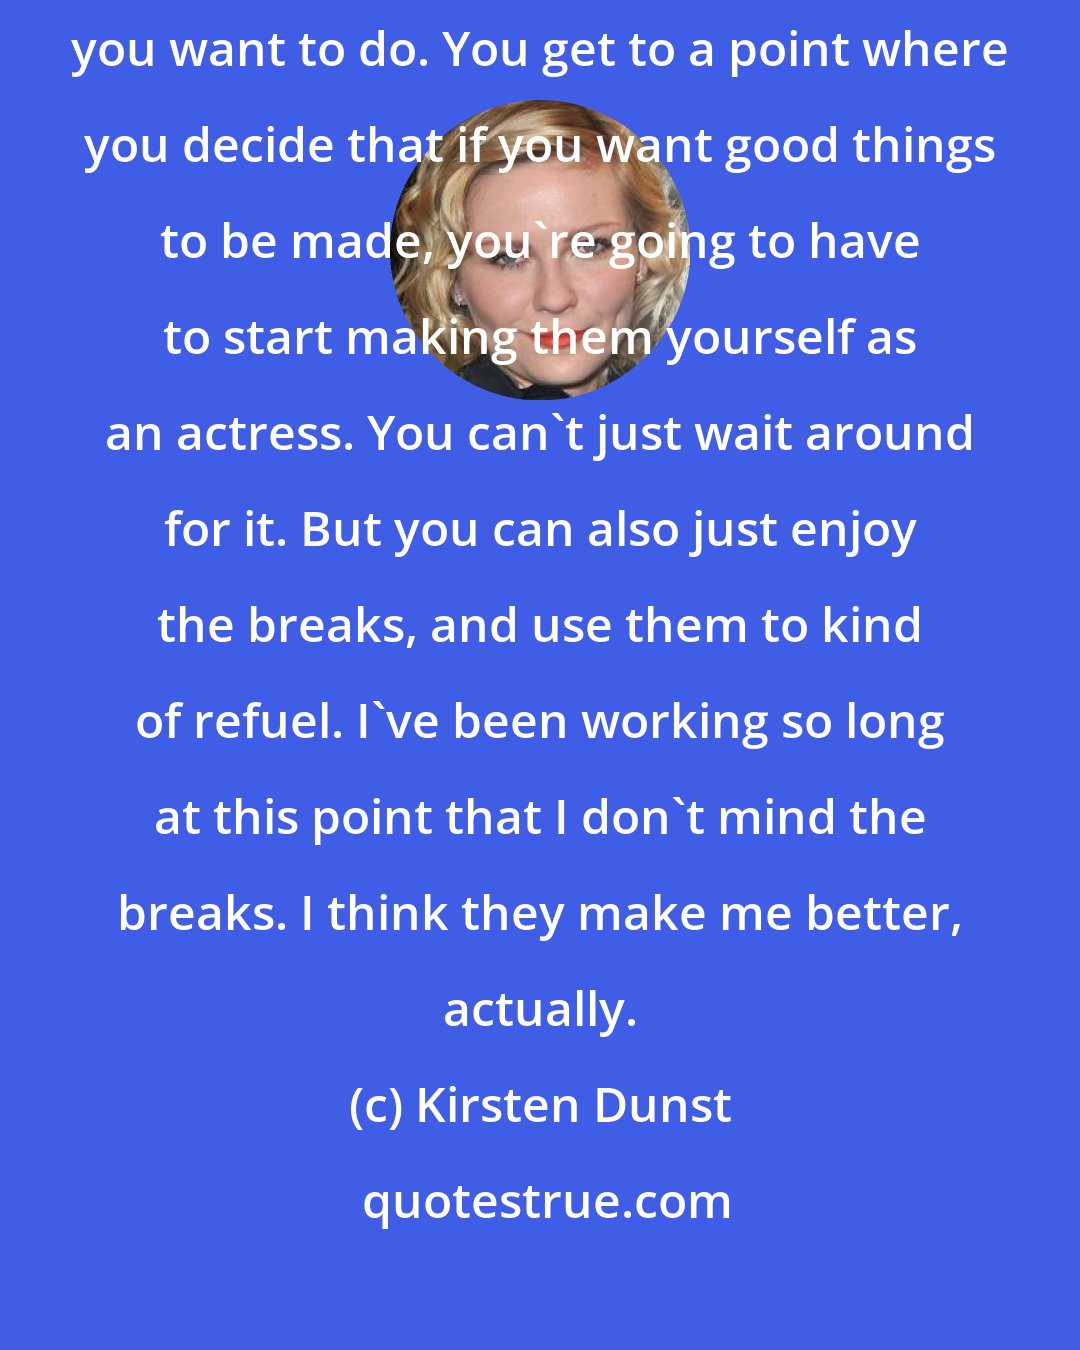 Kirsten Dunst: As an actress, there's a lot of waiting. You wait for a script to come in that you want to do. You get to a point where you decide that if you want good things to be made, you're going to have to start making them yourself as an actress. You can't just wait around for it. But you can also just enjoy the breaks, and use them to kind of refuel. I've been working so long at this point that I don't mind the breaks. I think they make me better, actually.